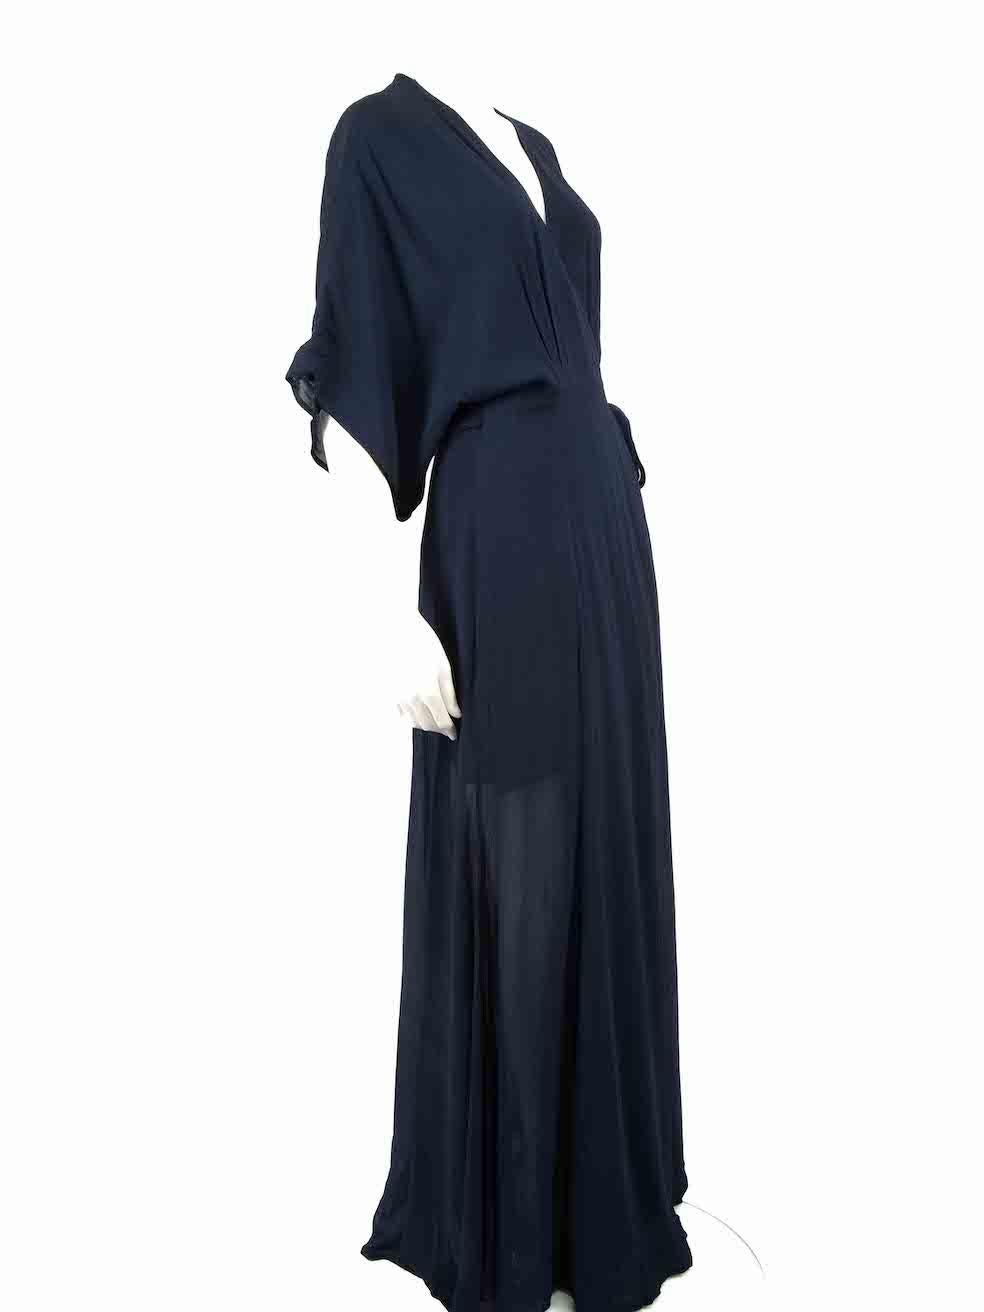 CONDITION is Very good. Hardly any visible wear to dress is evident on this used Reformation designer resale item.
 
 
 
 Details
 
 
 Navy
 
 Viscose
 
 Wrap dress
 
 Maxi
 
 Font leg slit
 
 Mid sleeves
 
 Tie fastening
 
 
 
 
 
 Made in China
 
